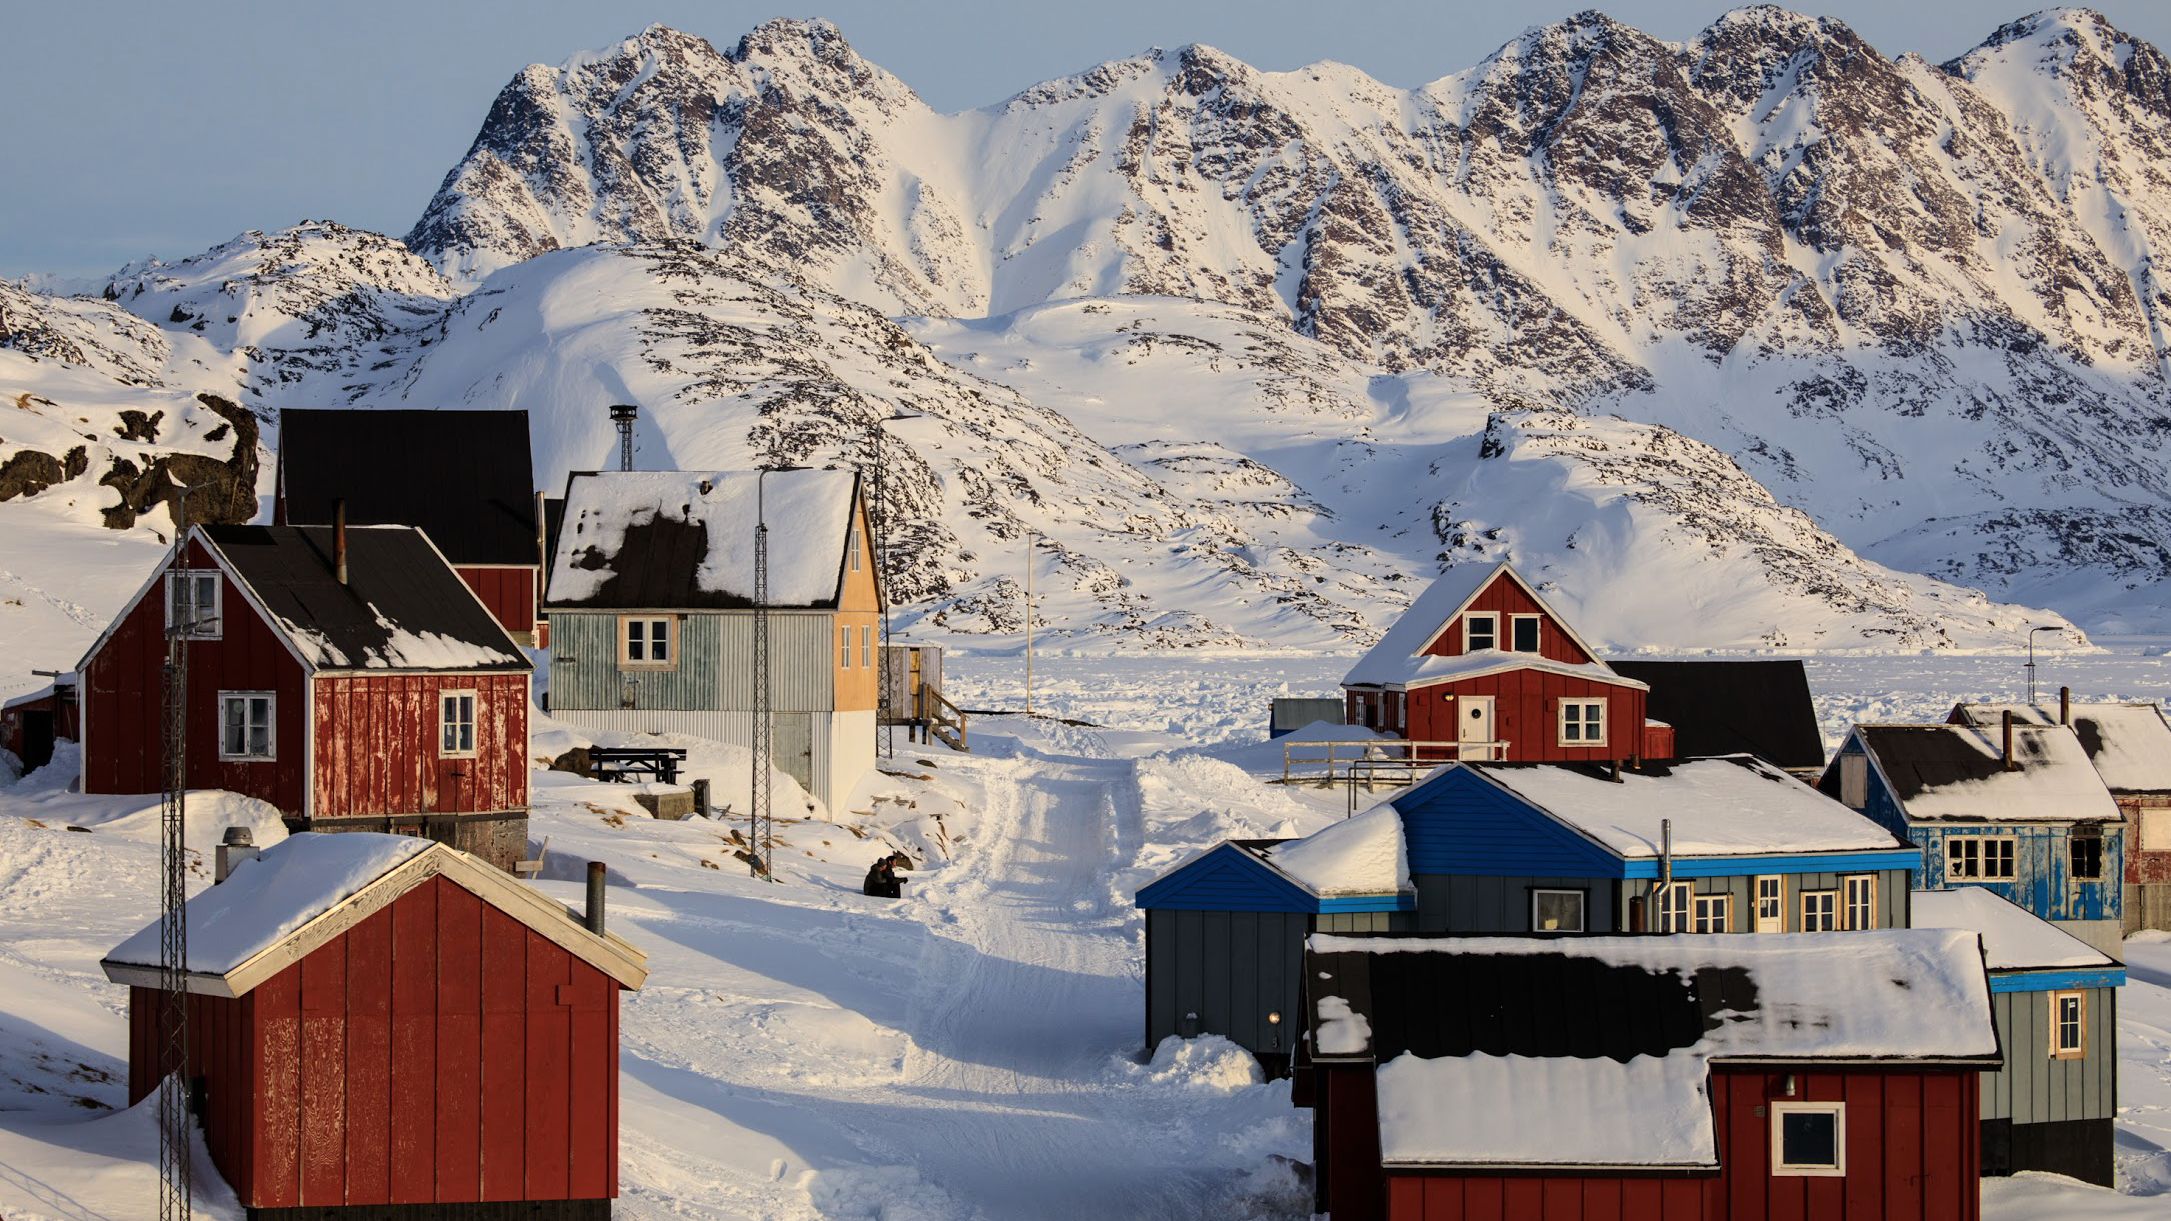 Downtown Kulusuk, Greenland, where winter now starts several weeks later and ends sooner. Nearby, one of the fastest- moving glaciers in the world, the Helheim Glacier, flows at more than 70 feet a day, dumping millions of tons of ice into the ocean. 